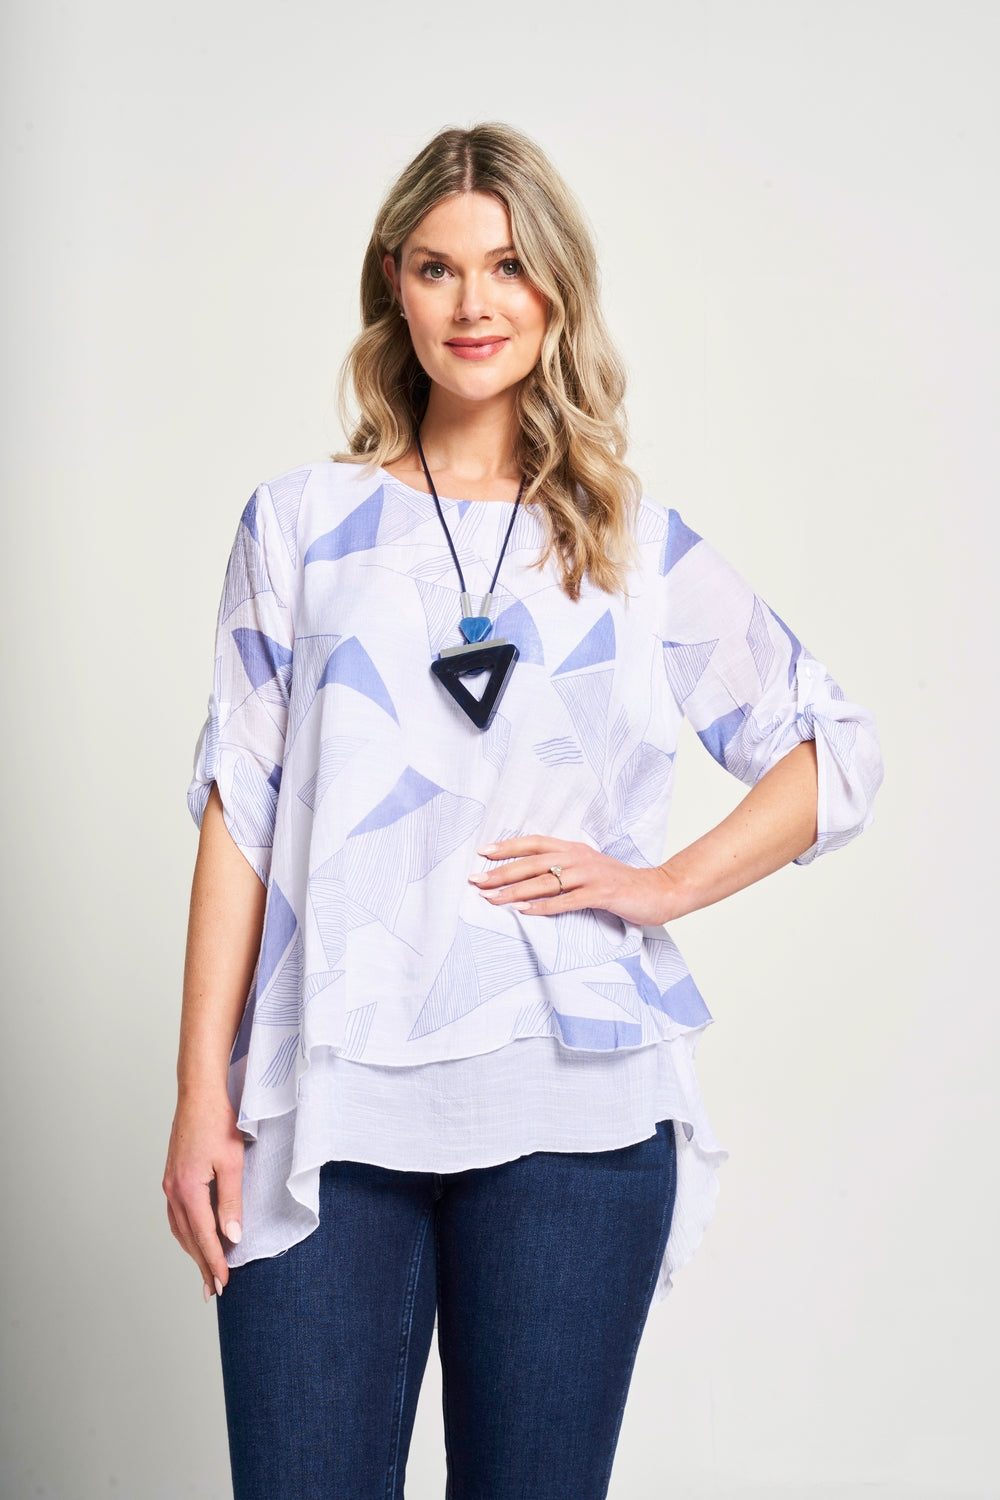 Saloos Geometric Pattern Split Back Top with Necklace